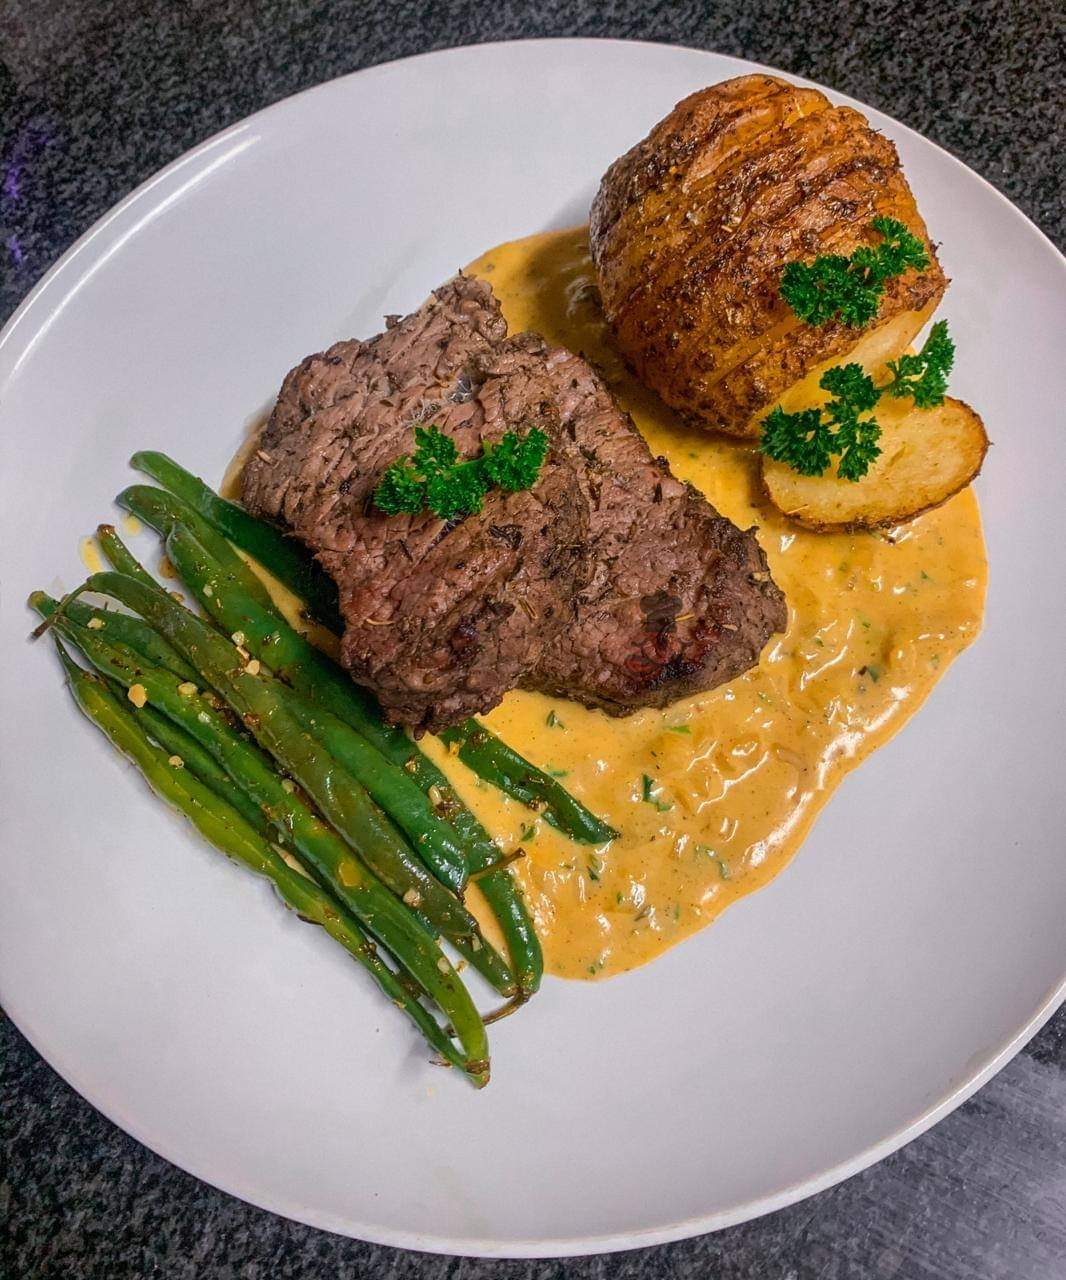 Beef fillet with a roasted potato side with green beans served with garlic sauce.